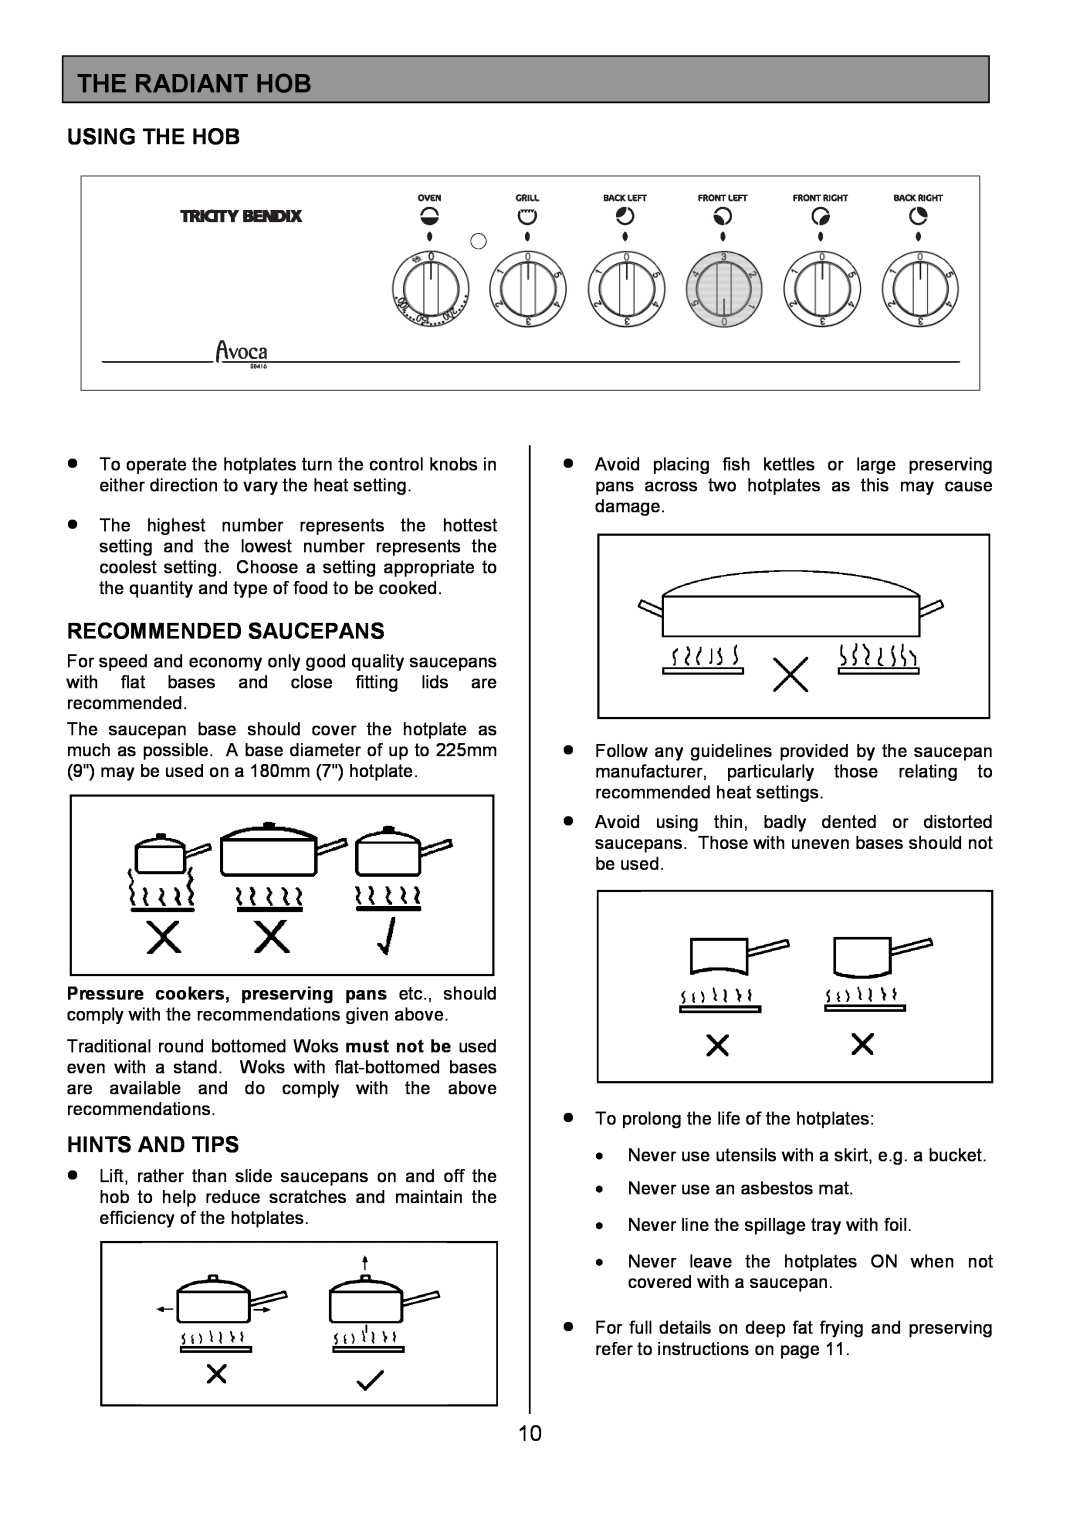 Tricity Bendix SB416 installation instructions The Radiant Hob, Using The Hob, Recommended Saucepans, Hints And Tips 